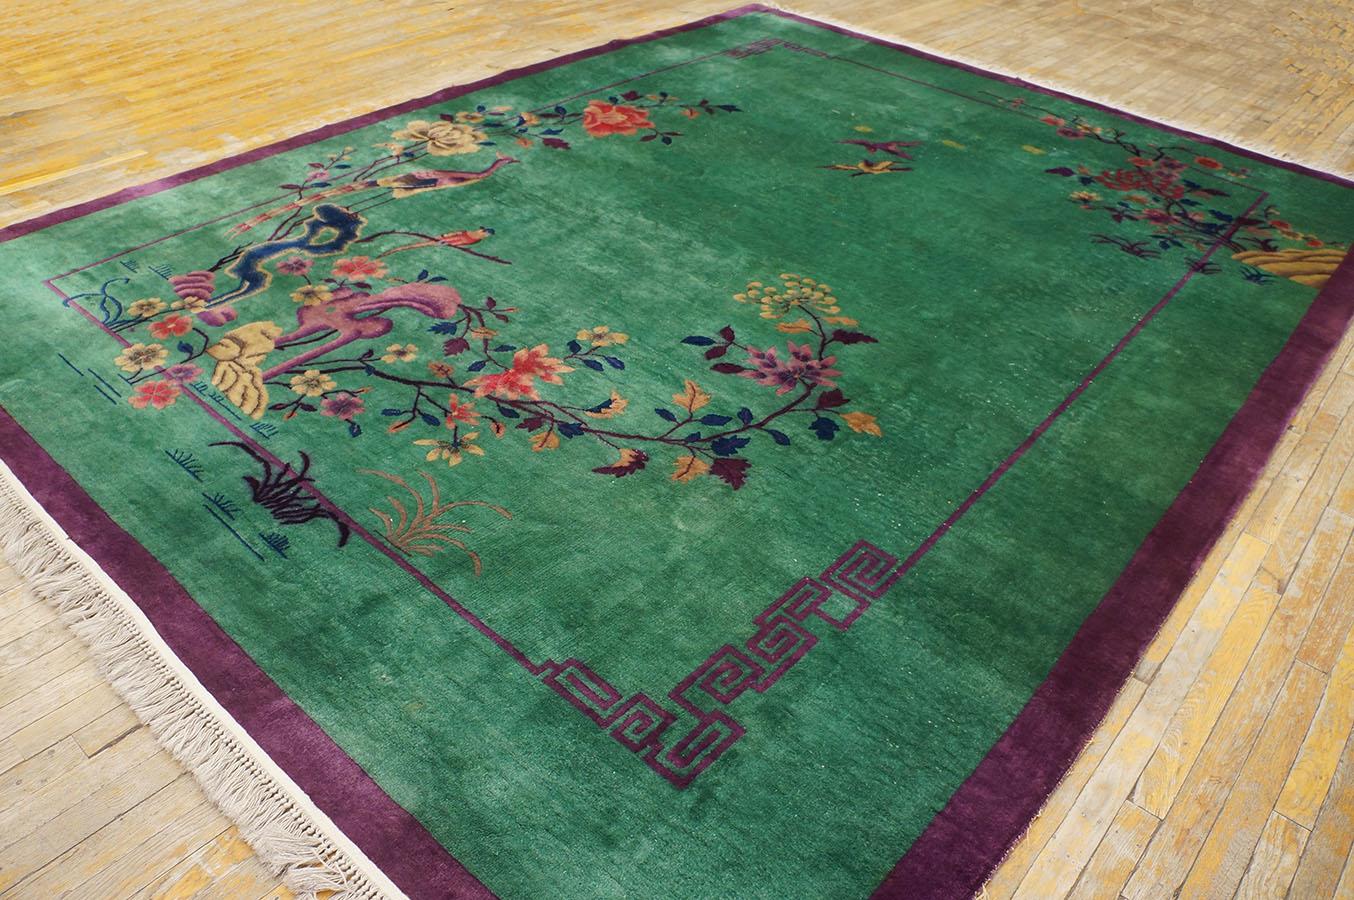 1920s Chinese Art Deco Carpet ( 9' x 11' 8'' - 275 x 355 cm )
With green background .
Floral design with plain small purple border,